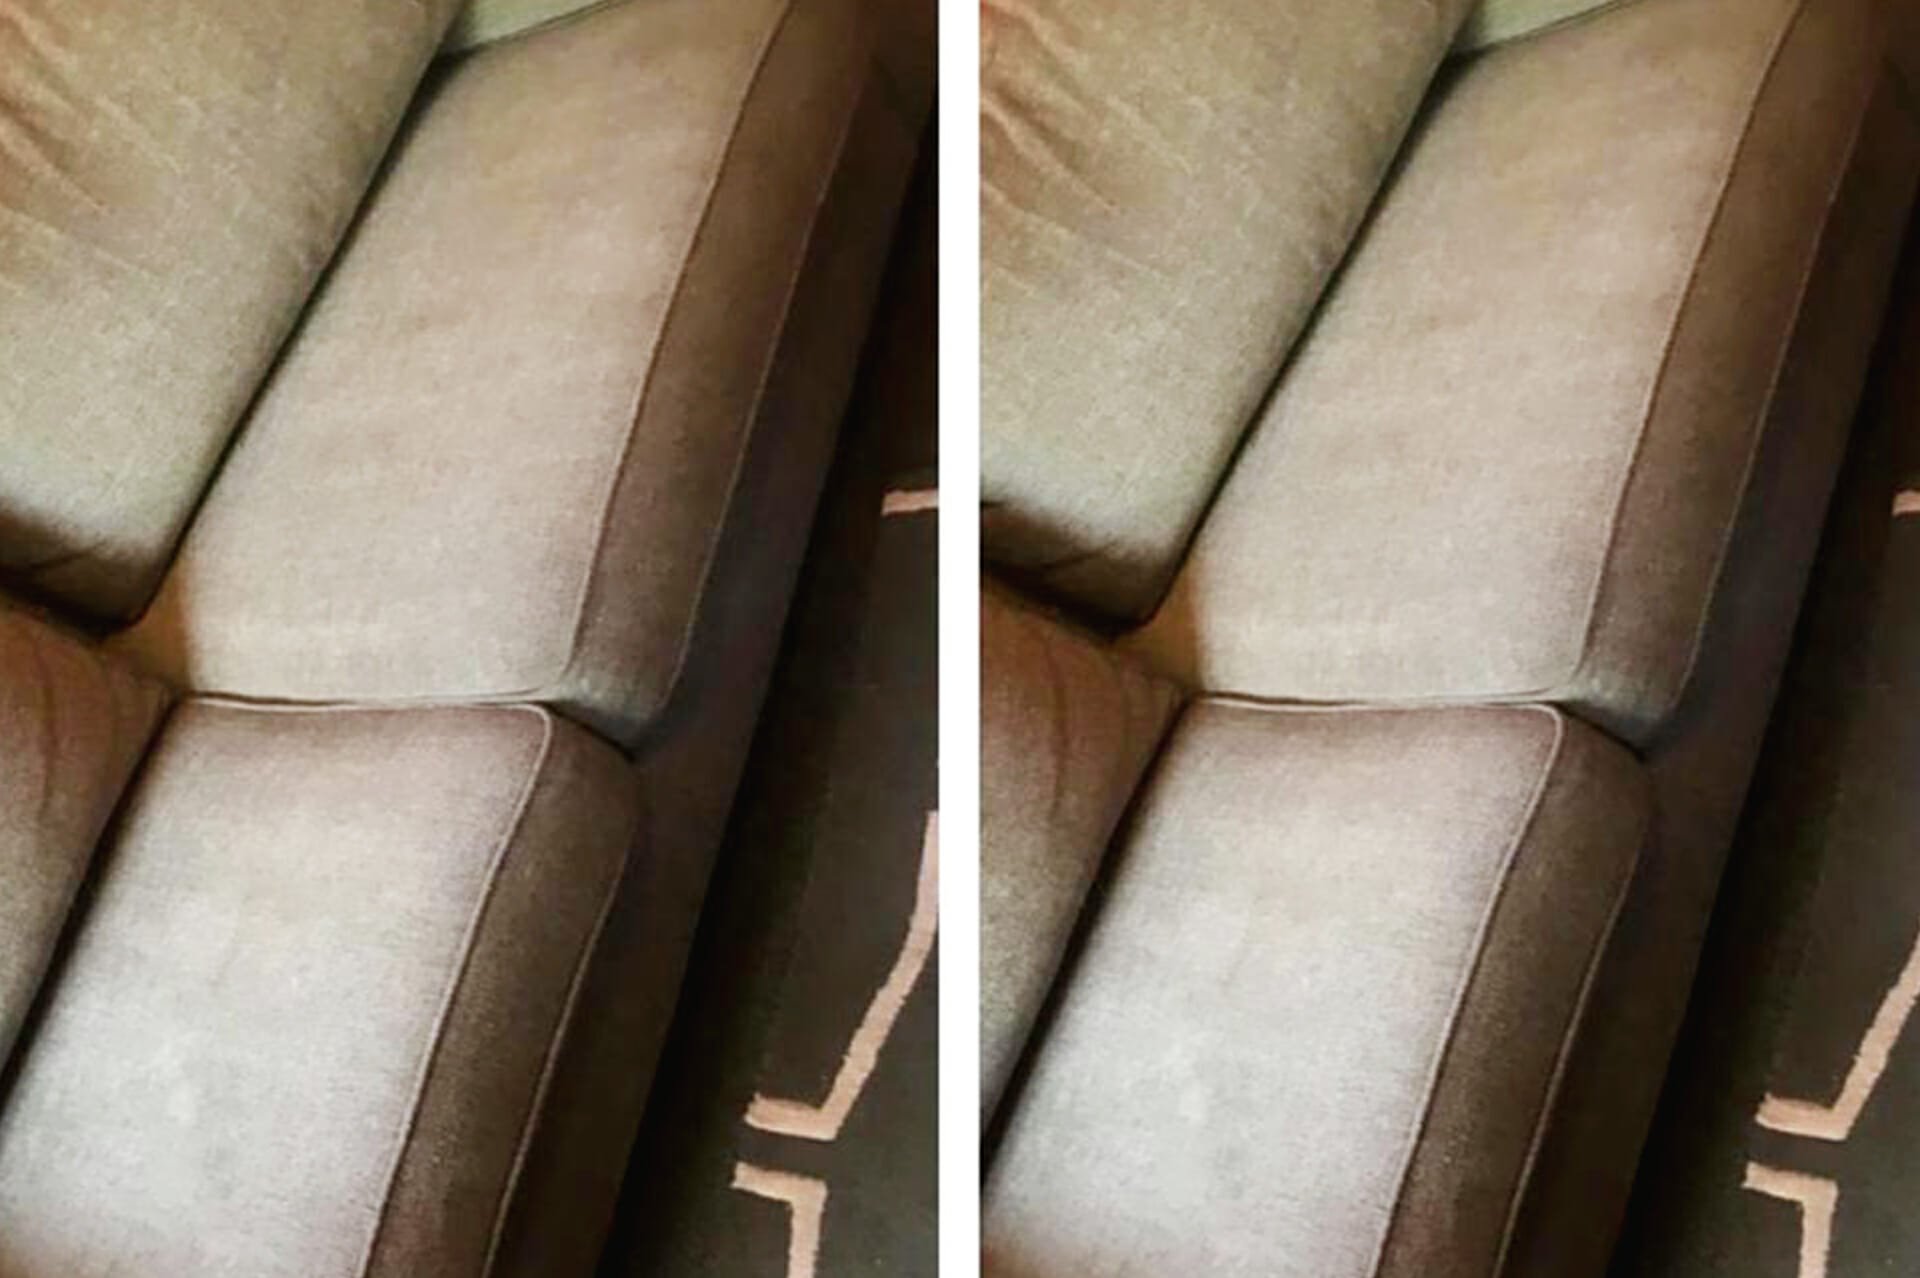 after upholstery cleaning in Sydney